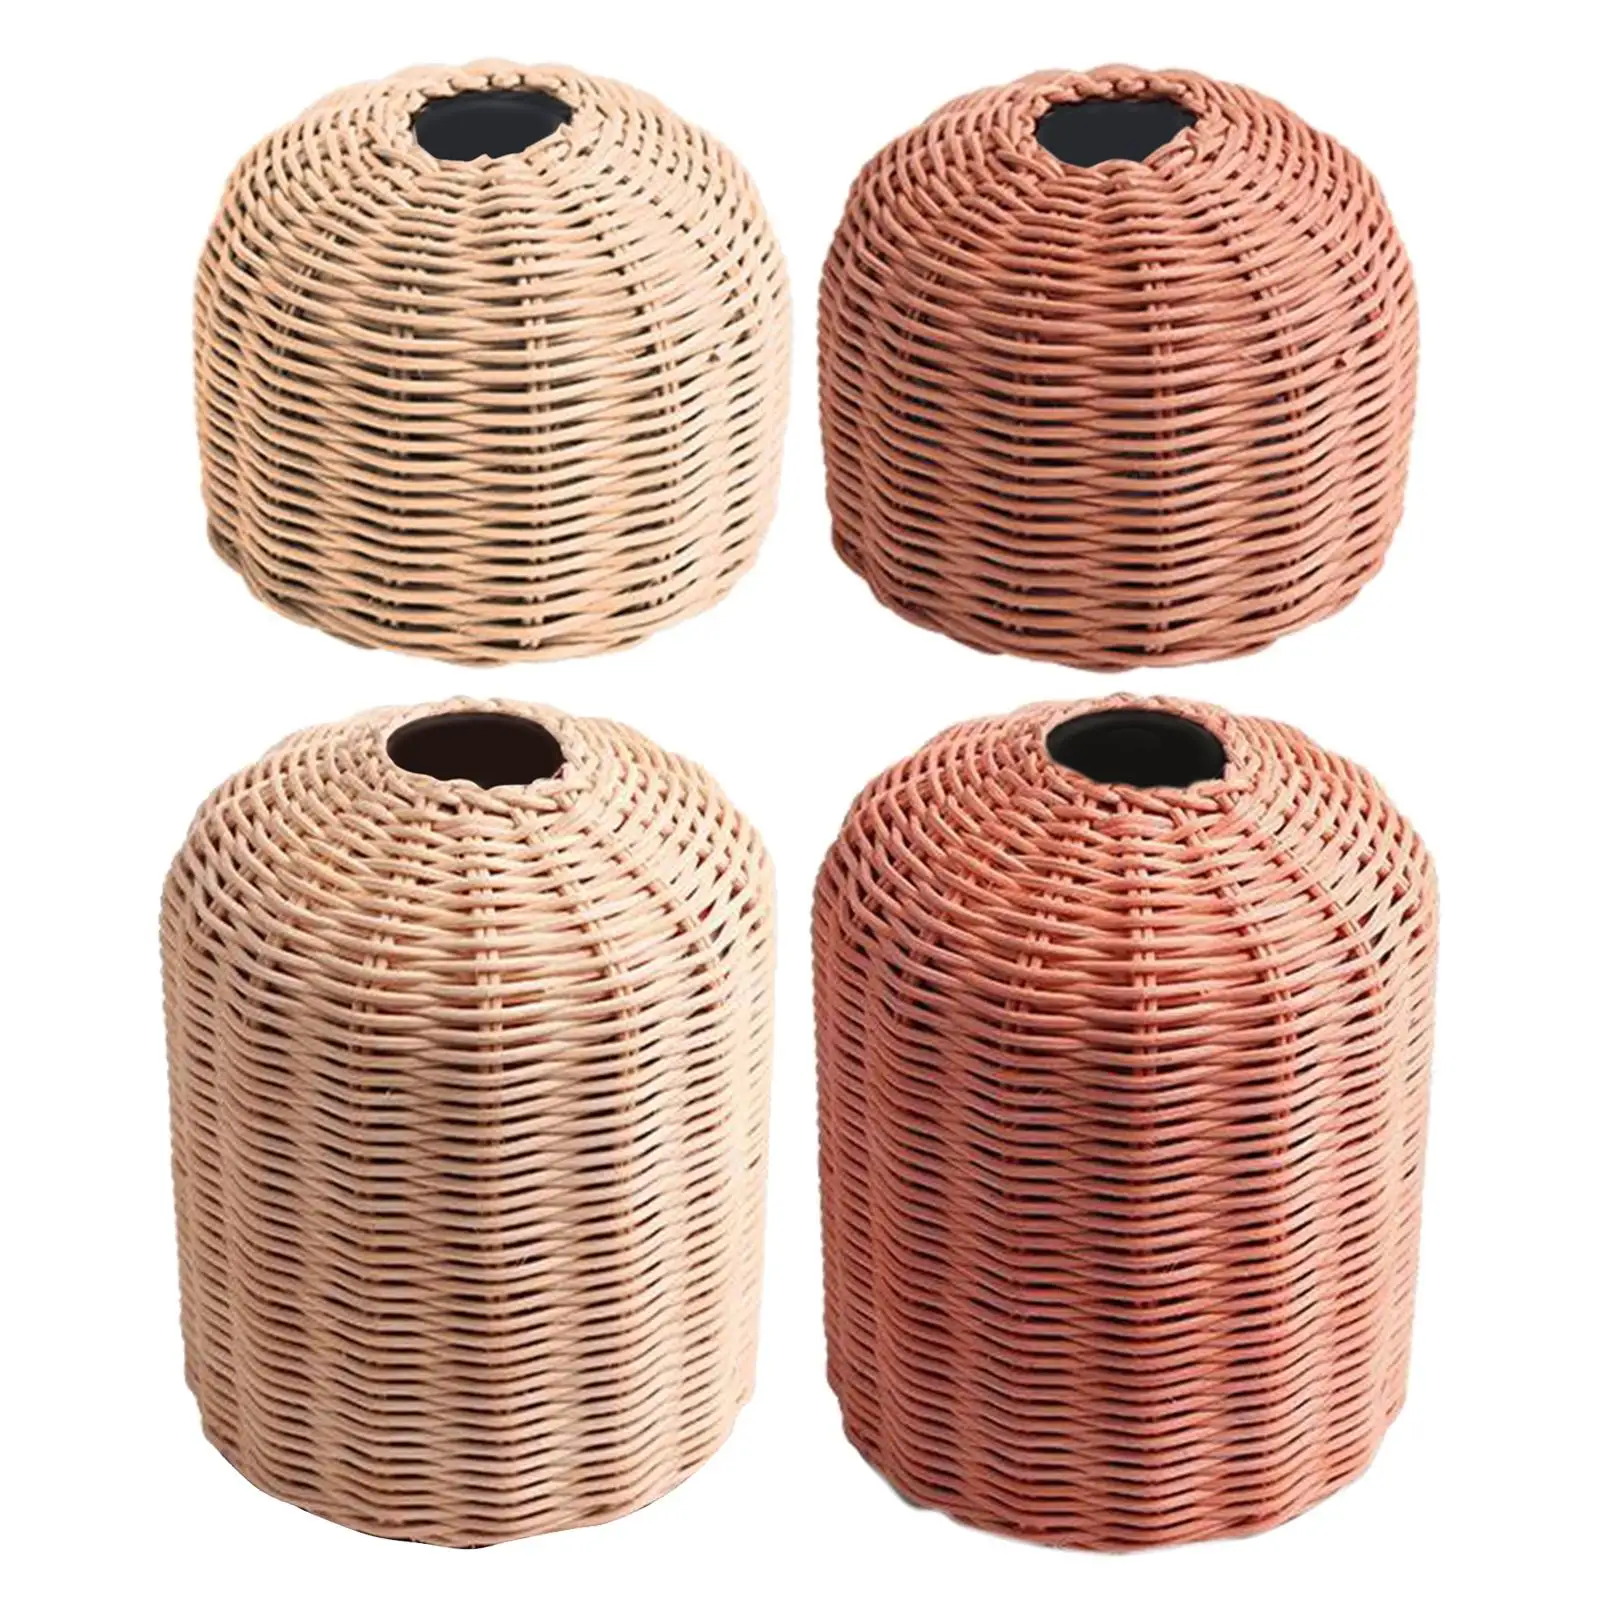 Rattan Handmade Cooking Gas Cylinder Cover Camping Hiking Pouch